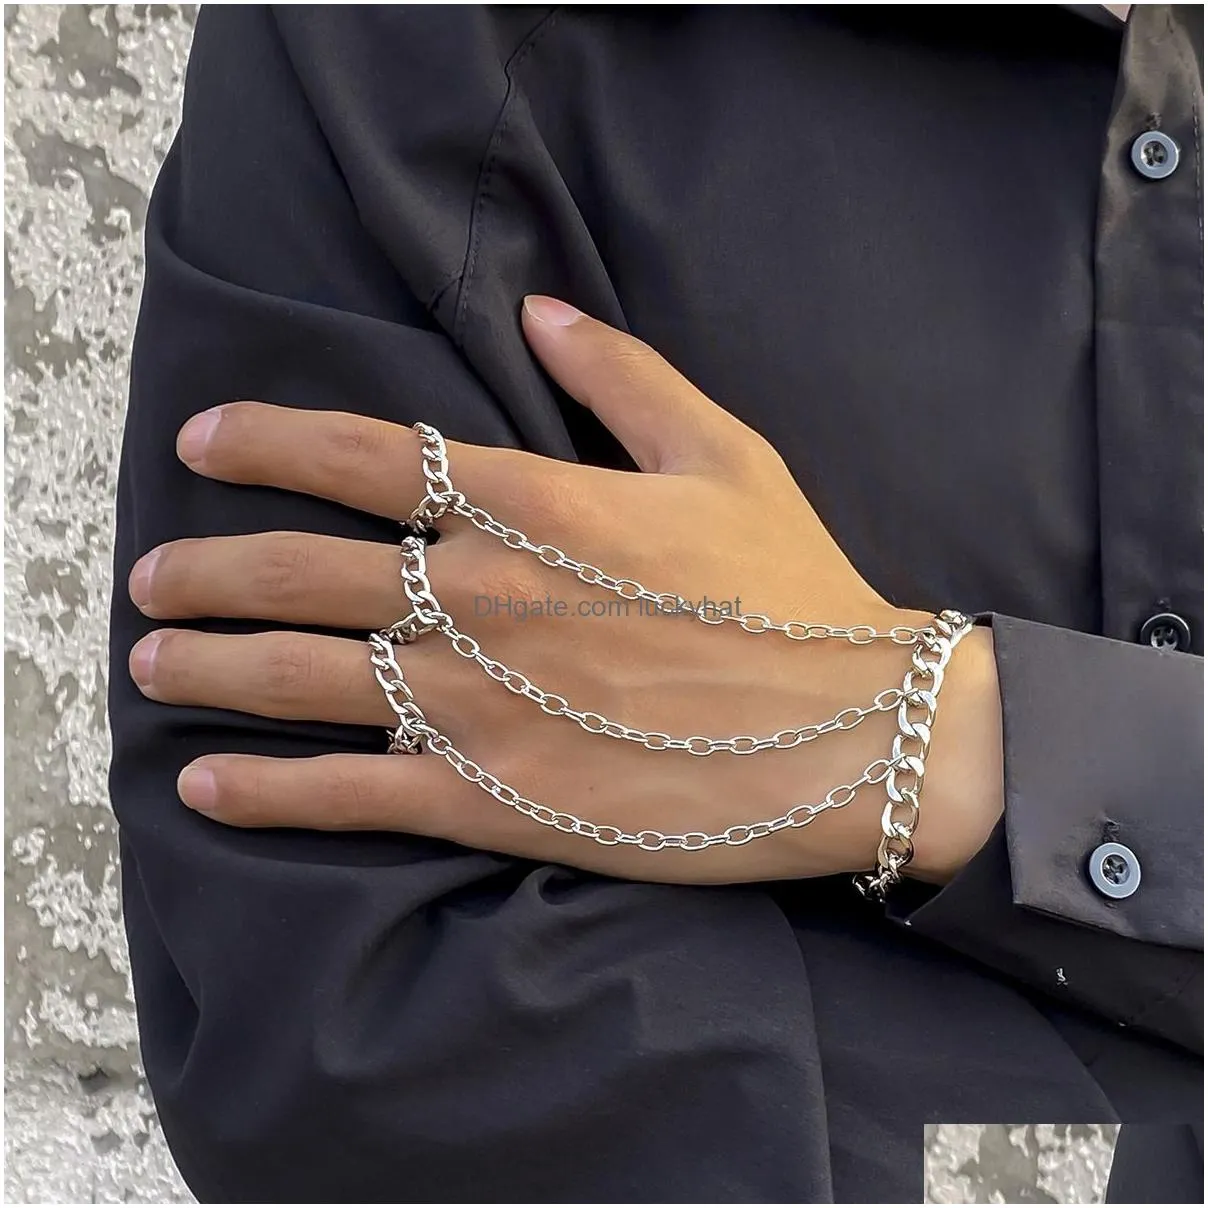 Cool Silver Color Metal Bead Link Chain Men Wrist Bracelet For Women Punk Fashion Geometric Ring Jewelry Personality Gifts